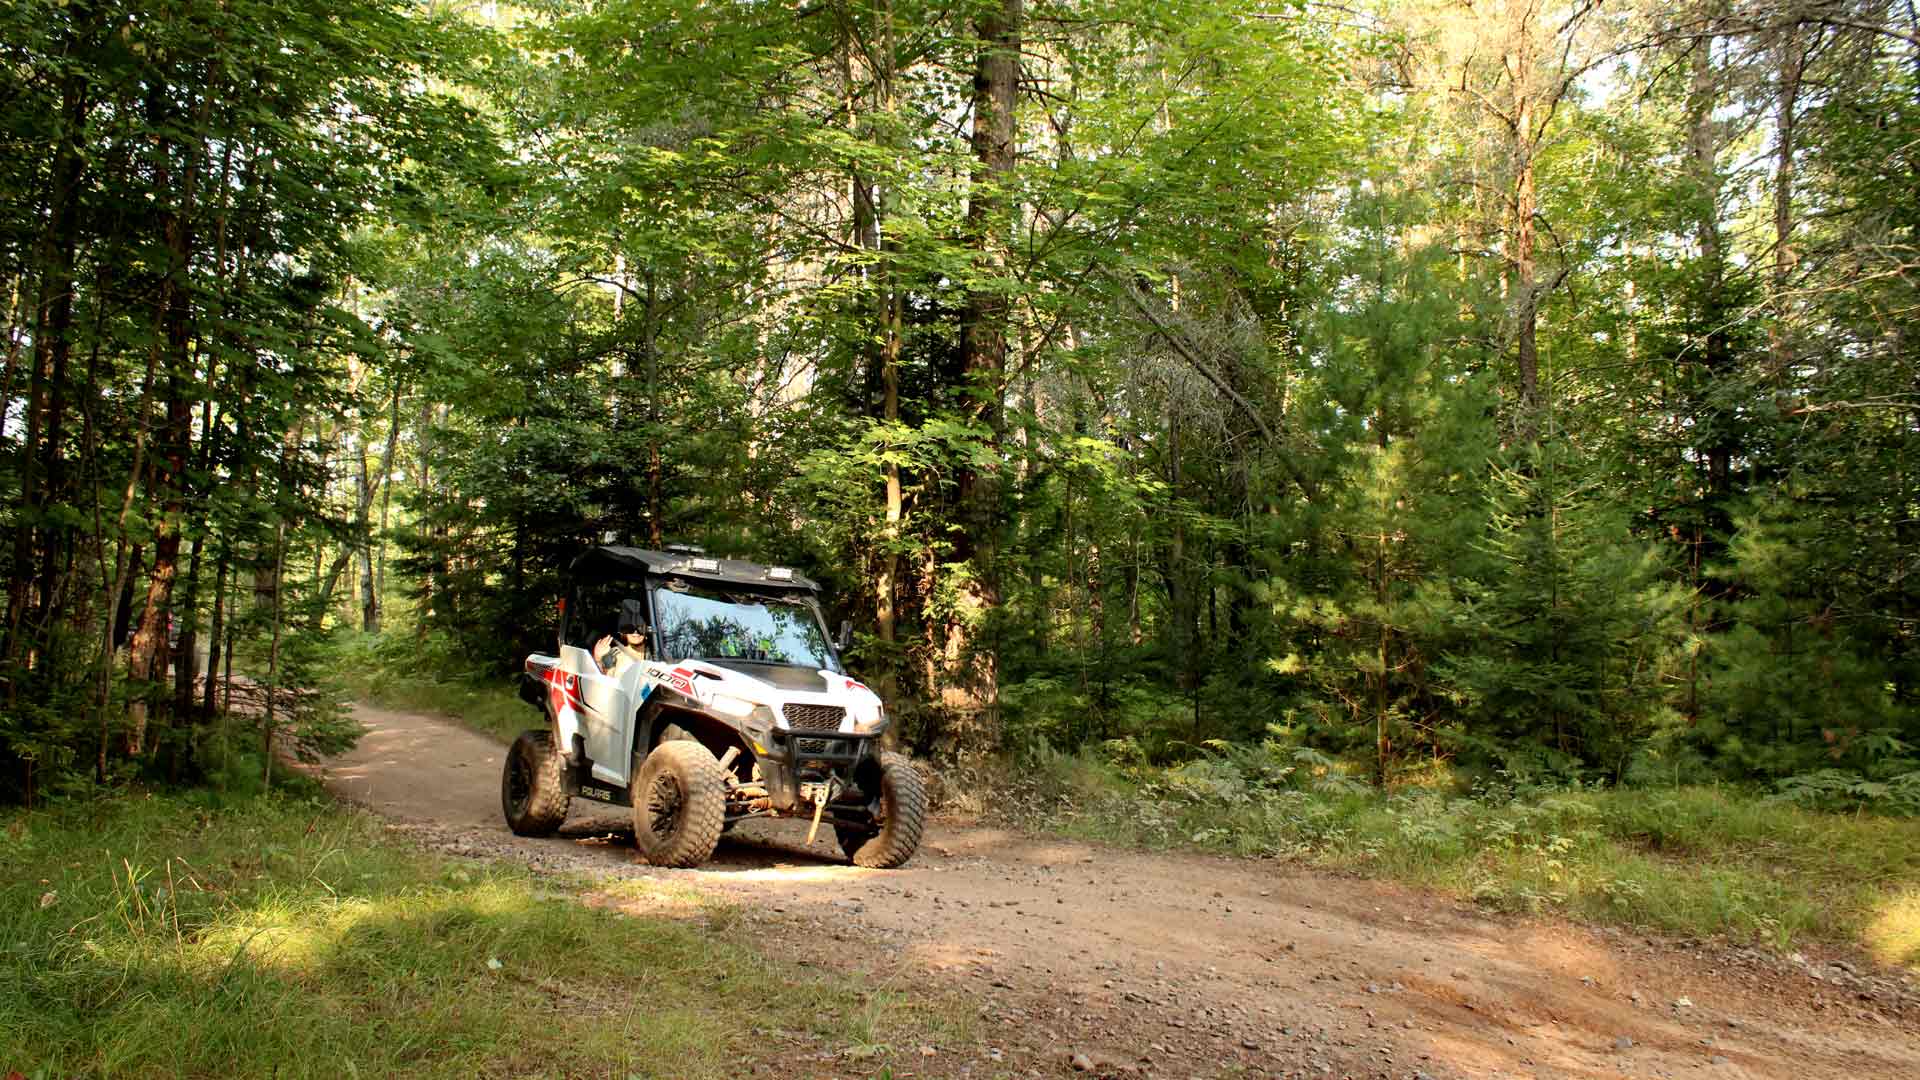 ATV driving on trail through forest of Lakeland ATV Club trails in Vilas County, Wisconsin